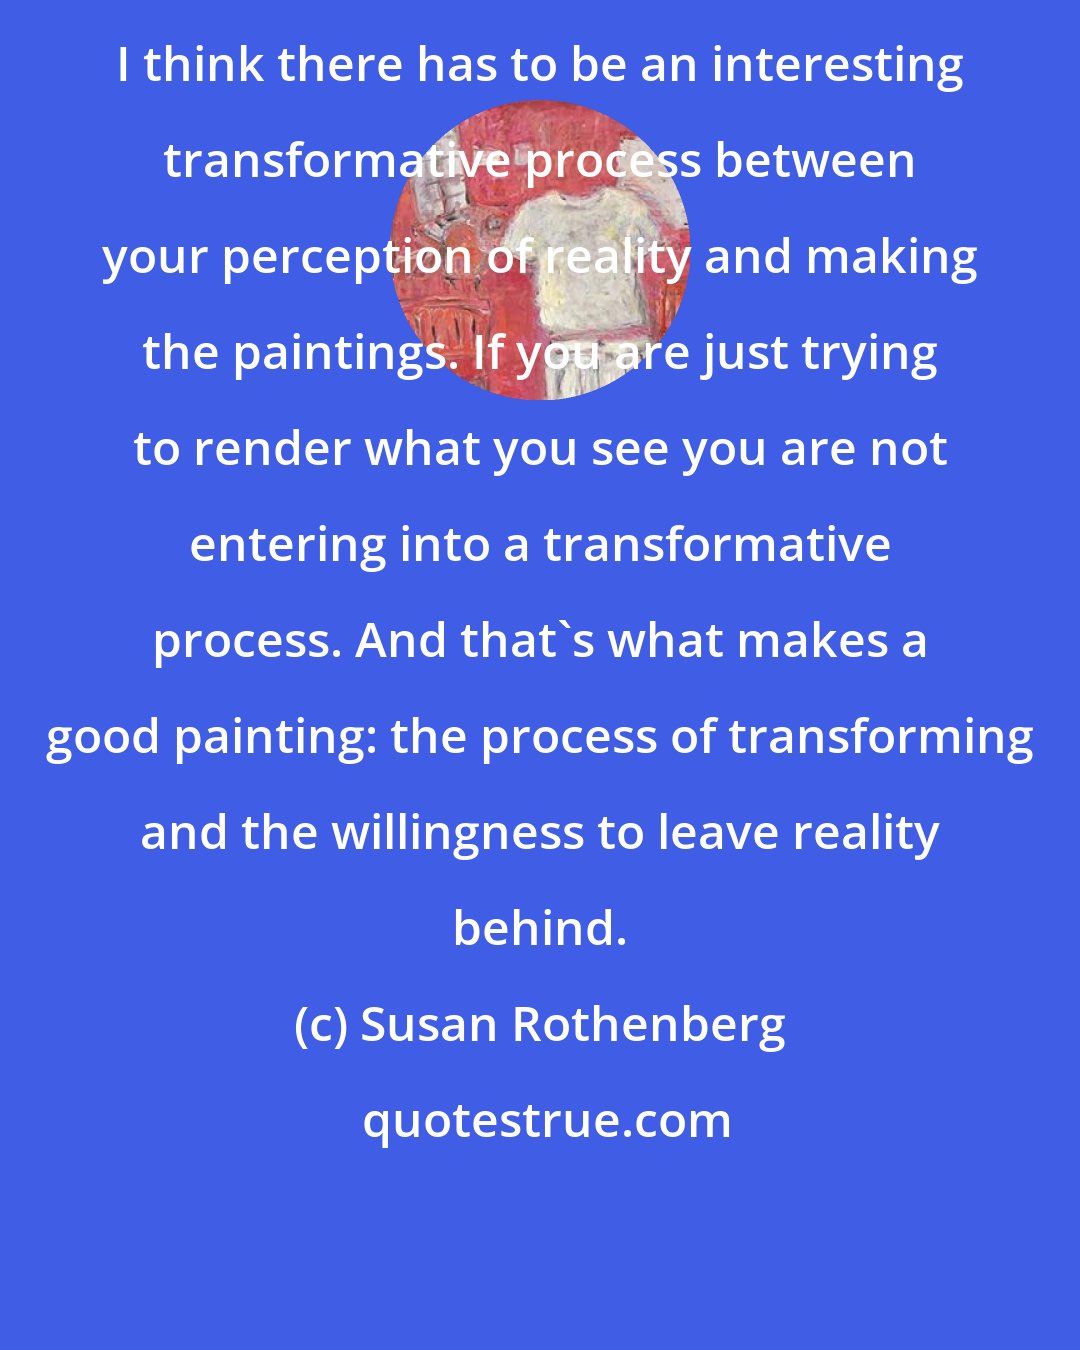 Susan Rothenberg: I think there has to be an interesting transformative process between your perception of reality and making the paintings. If you are just trying to render what you see you are not entering into a transformative process. And that's what makes a good painting: the process of transforming and the willingness to leave reality behind.